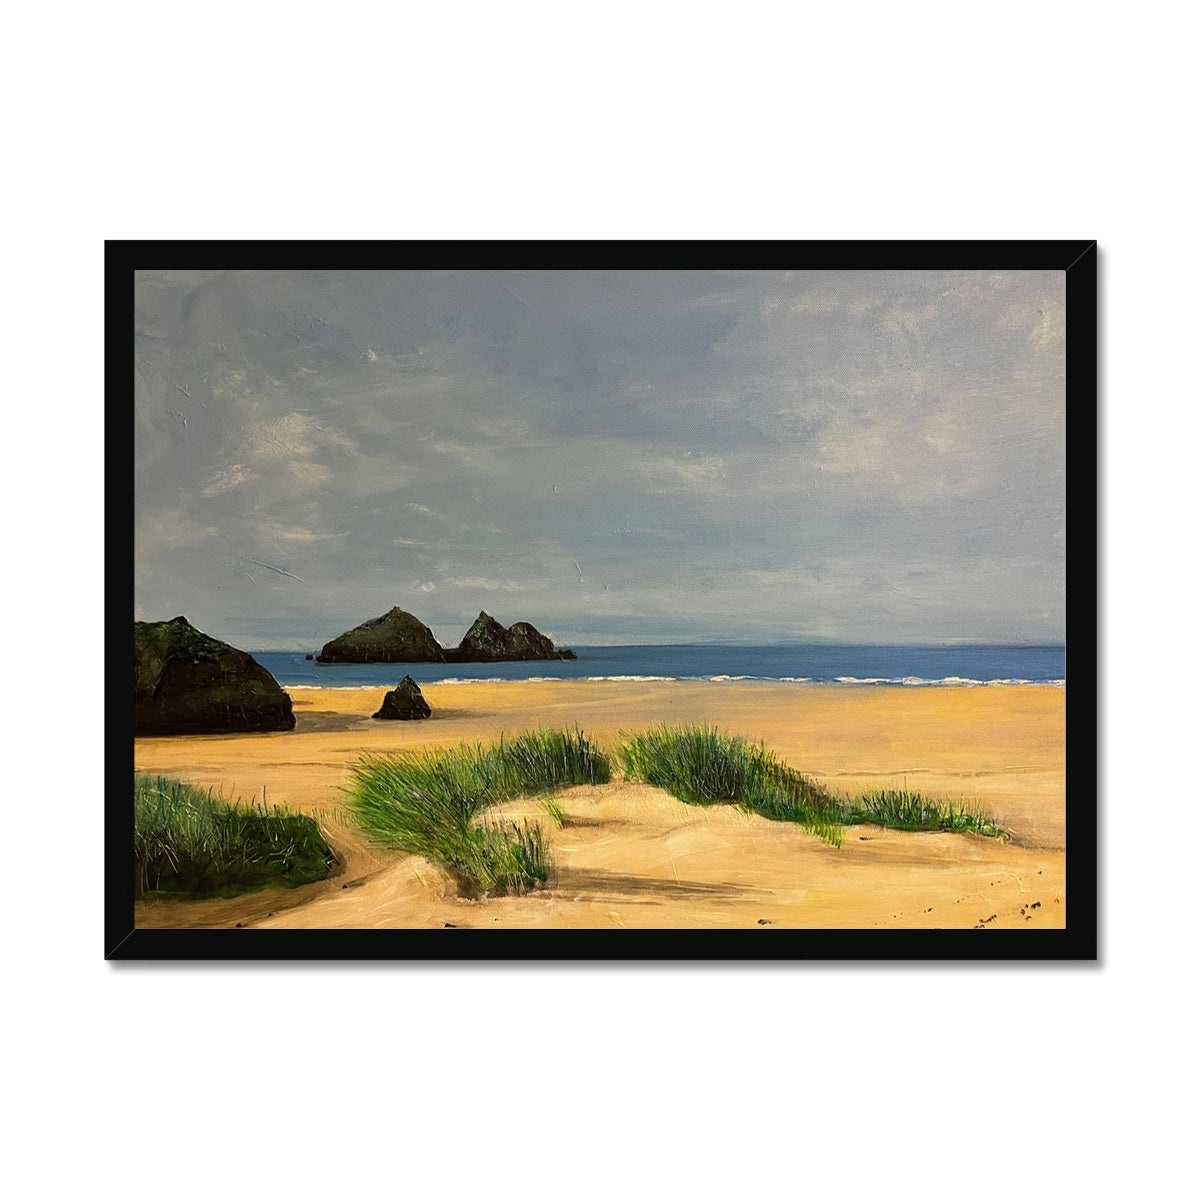 Holywell Bay Cornwall Painting | Framed Prints From Scotland-Framed Prints-World Art Gallery-A2 Landscape-Black Frame-Paintings, Prints, Homeware, Art Gifts From Scotland By Scottish Artist Kevin Hunter